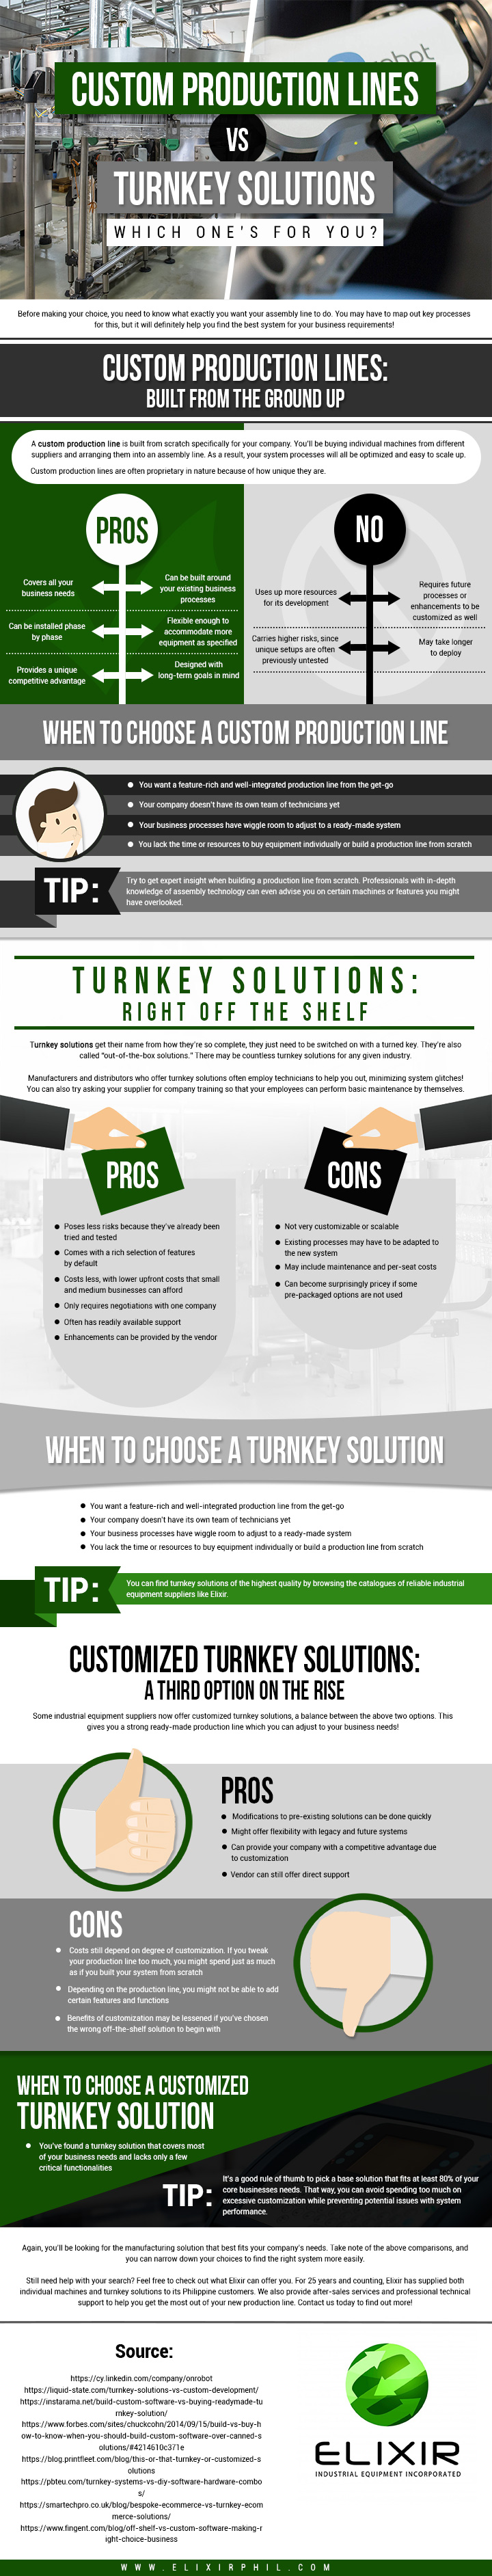 Customs Production Lines vs. Turnkey Solutions: Which One's For You